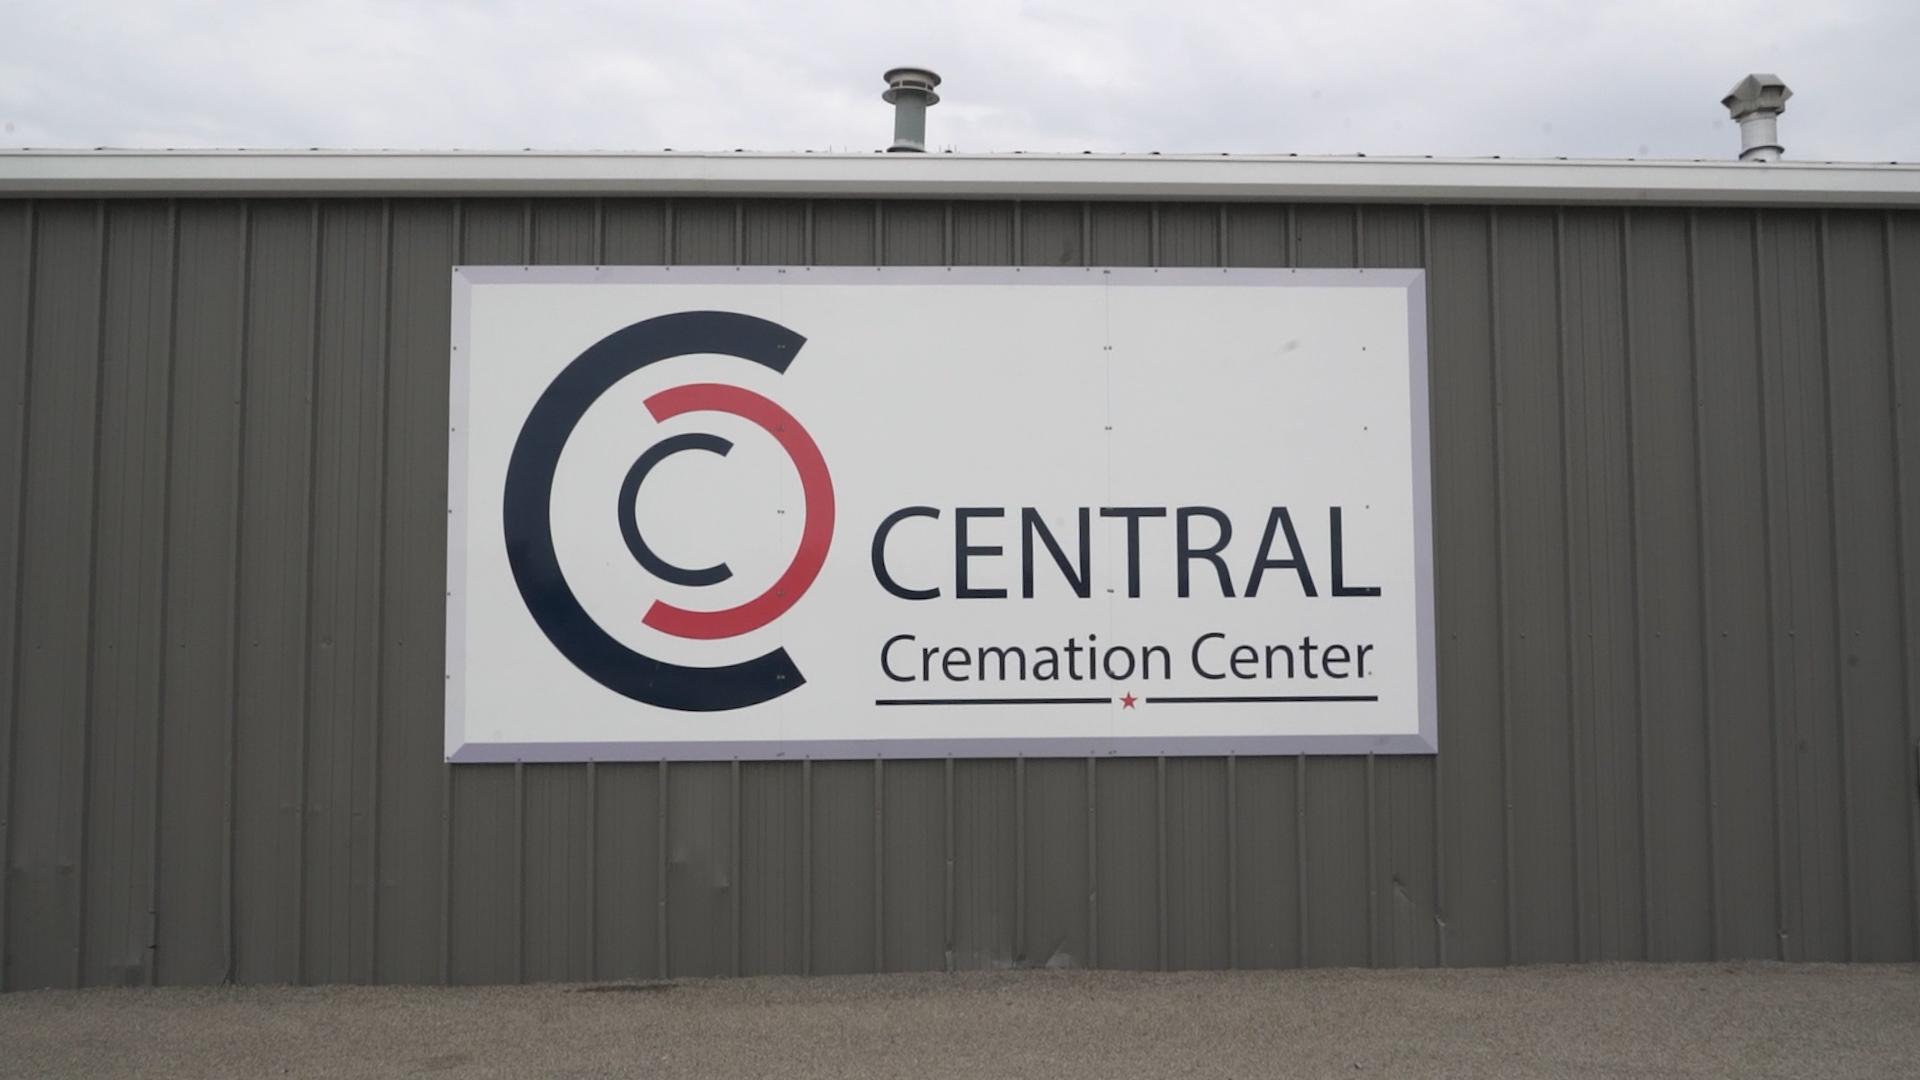 Central Cremation Center 110 W Weaver Rd, Forsyth Illinois 62535